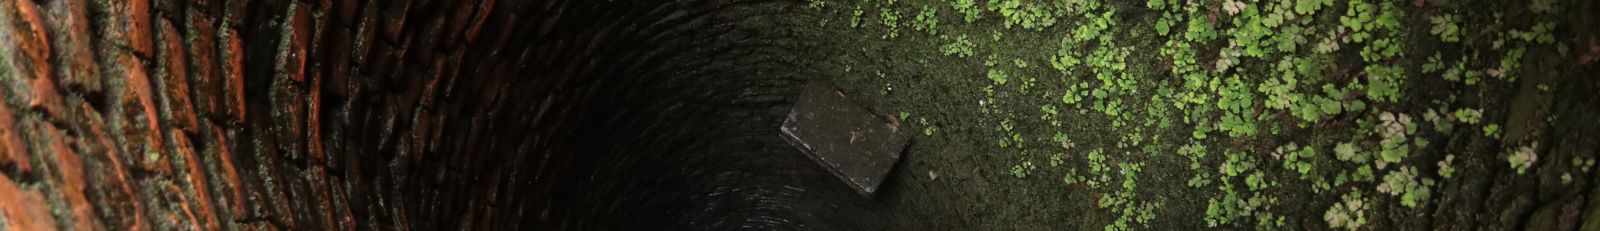 Image of inside of well.